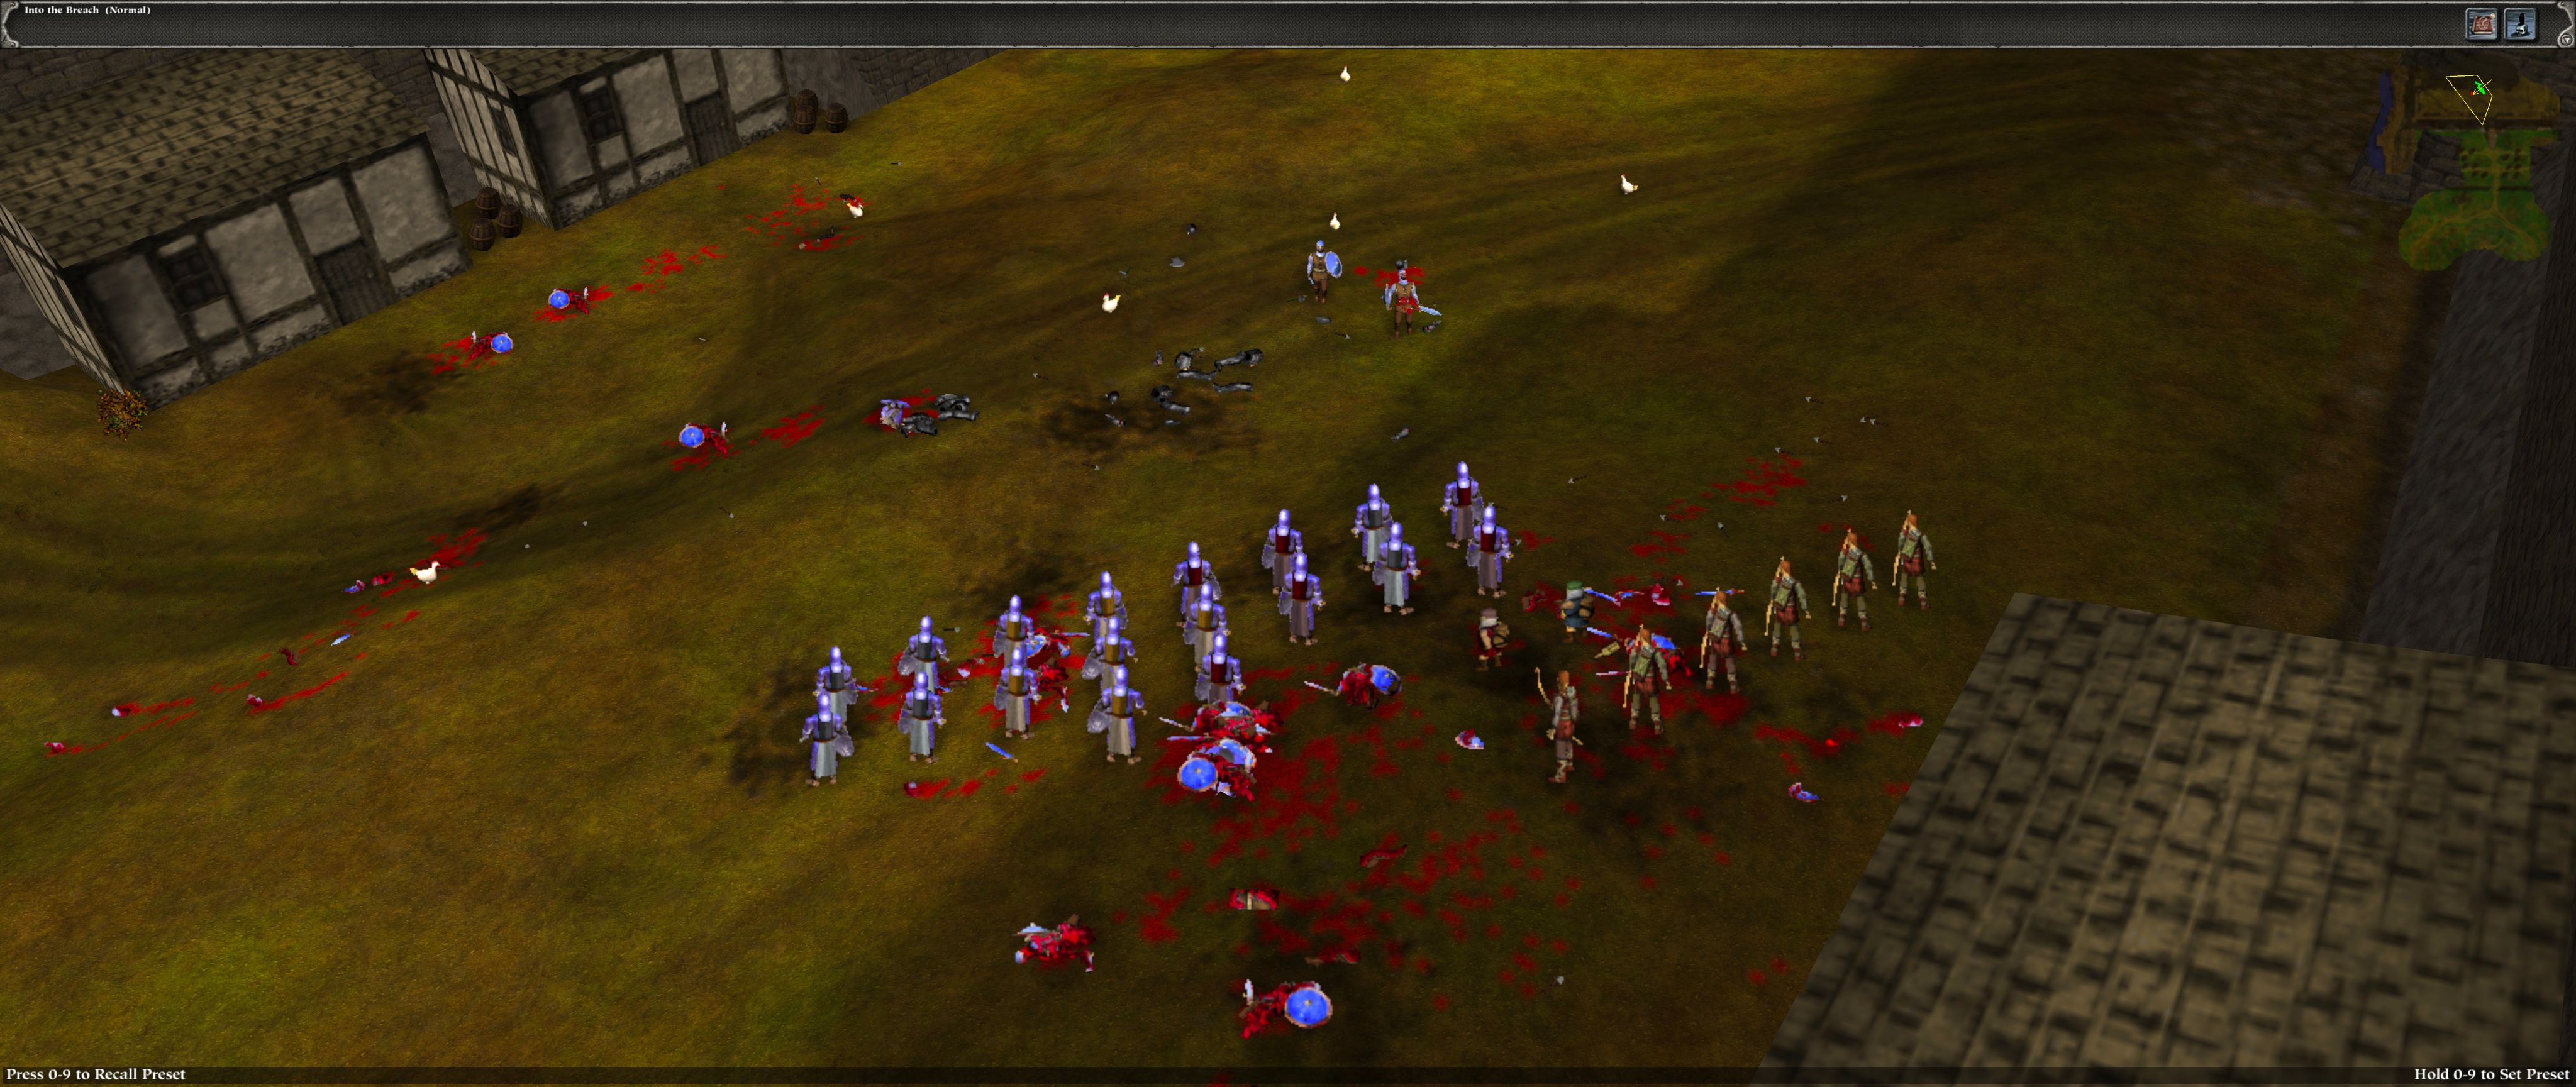 A screenshot from the real-time strategy game "Myth II: Soulblighter". It's a fantasy game, there's a formation of knights with swords and shields, two dwarves, and six elven bowmen all standing on a brown expanse of ground that's in the middle of a village. There's two enemy warriors approaching armed with round shields and swords, and one has just been hit by all six of the bowmen. On the ground there's a bunch of dead bodies with blood scattered around.